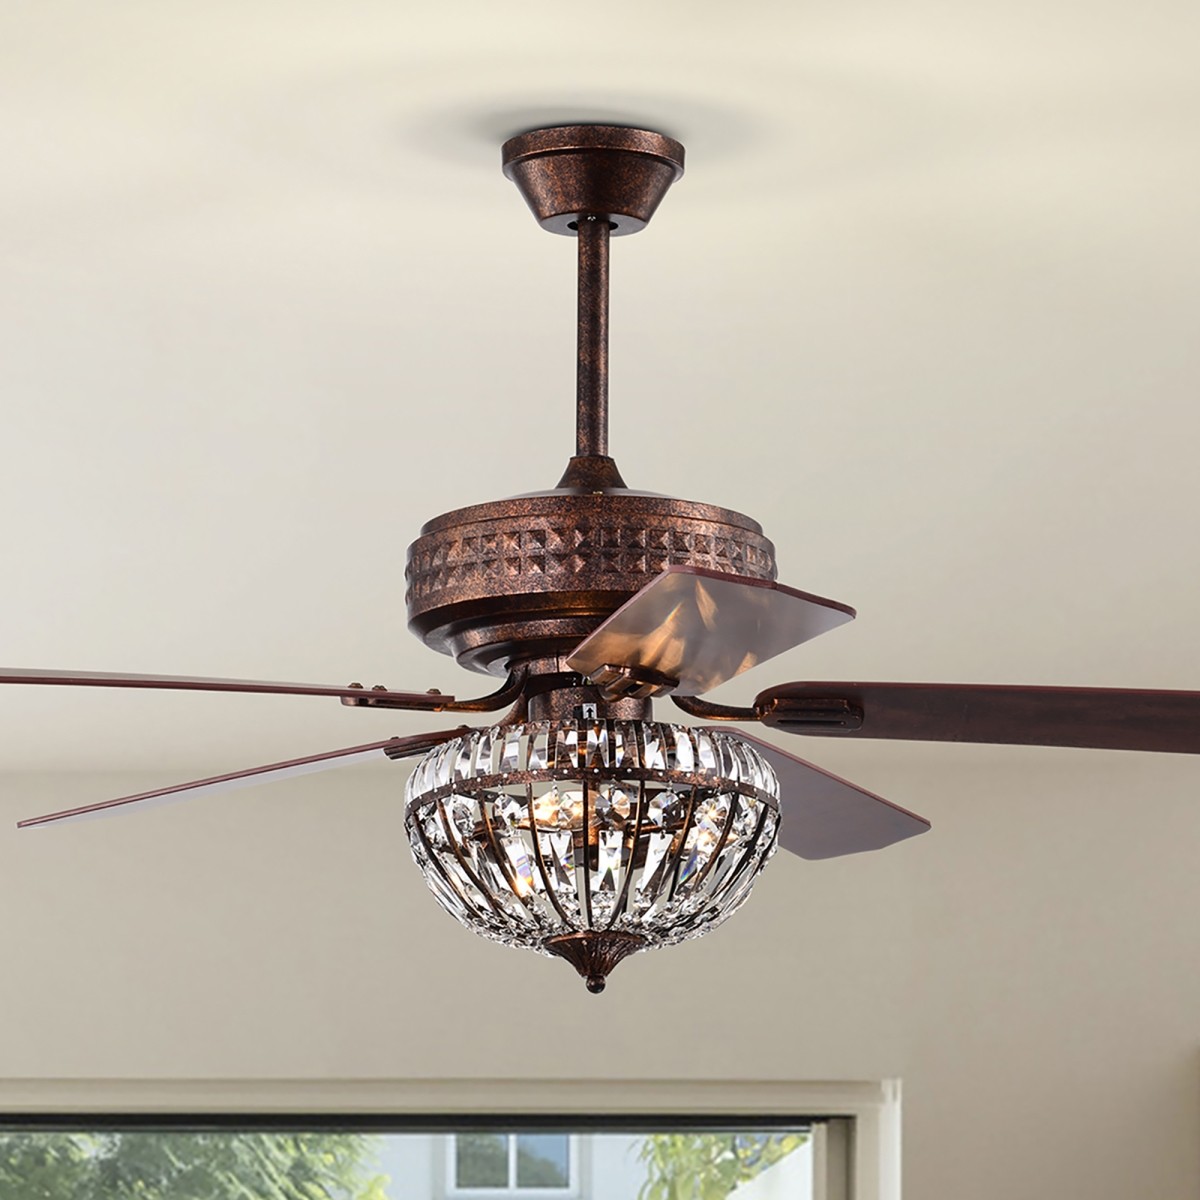 Violette 52 in. 3-Light Indoor Antique Copper Finish Ceiling Fan with Light Kit and Remote